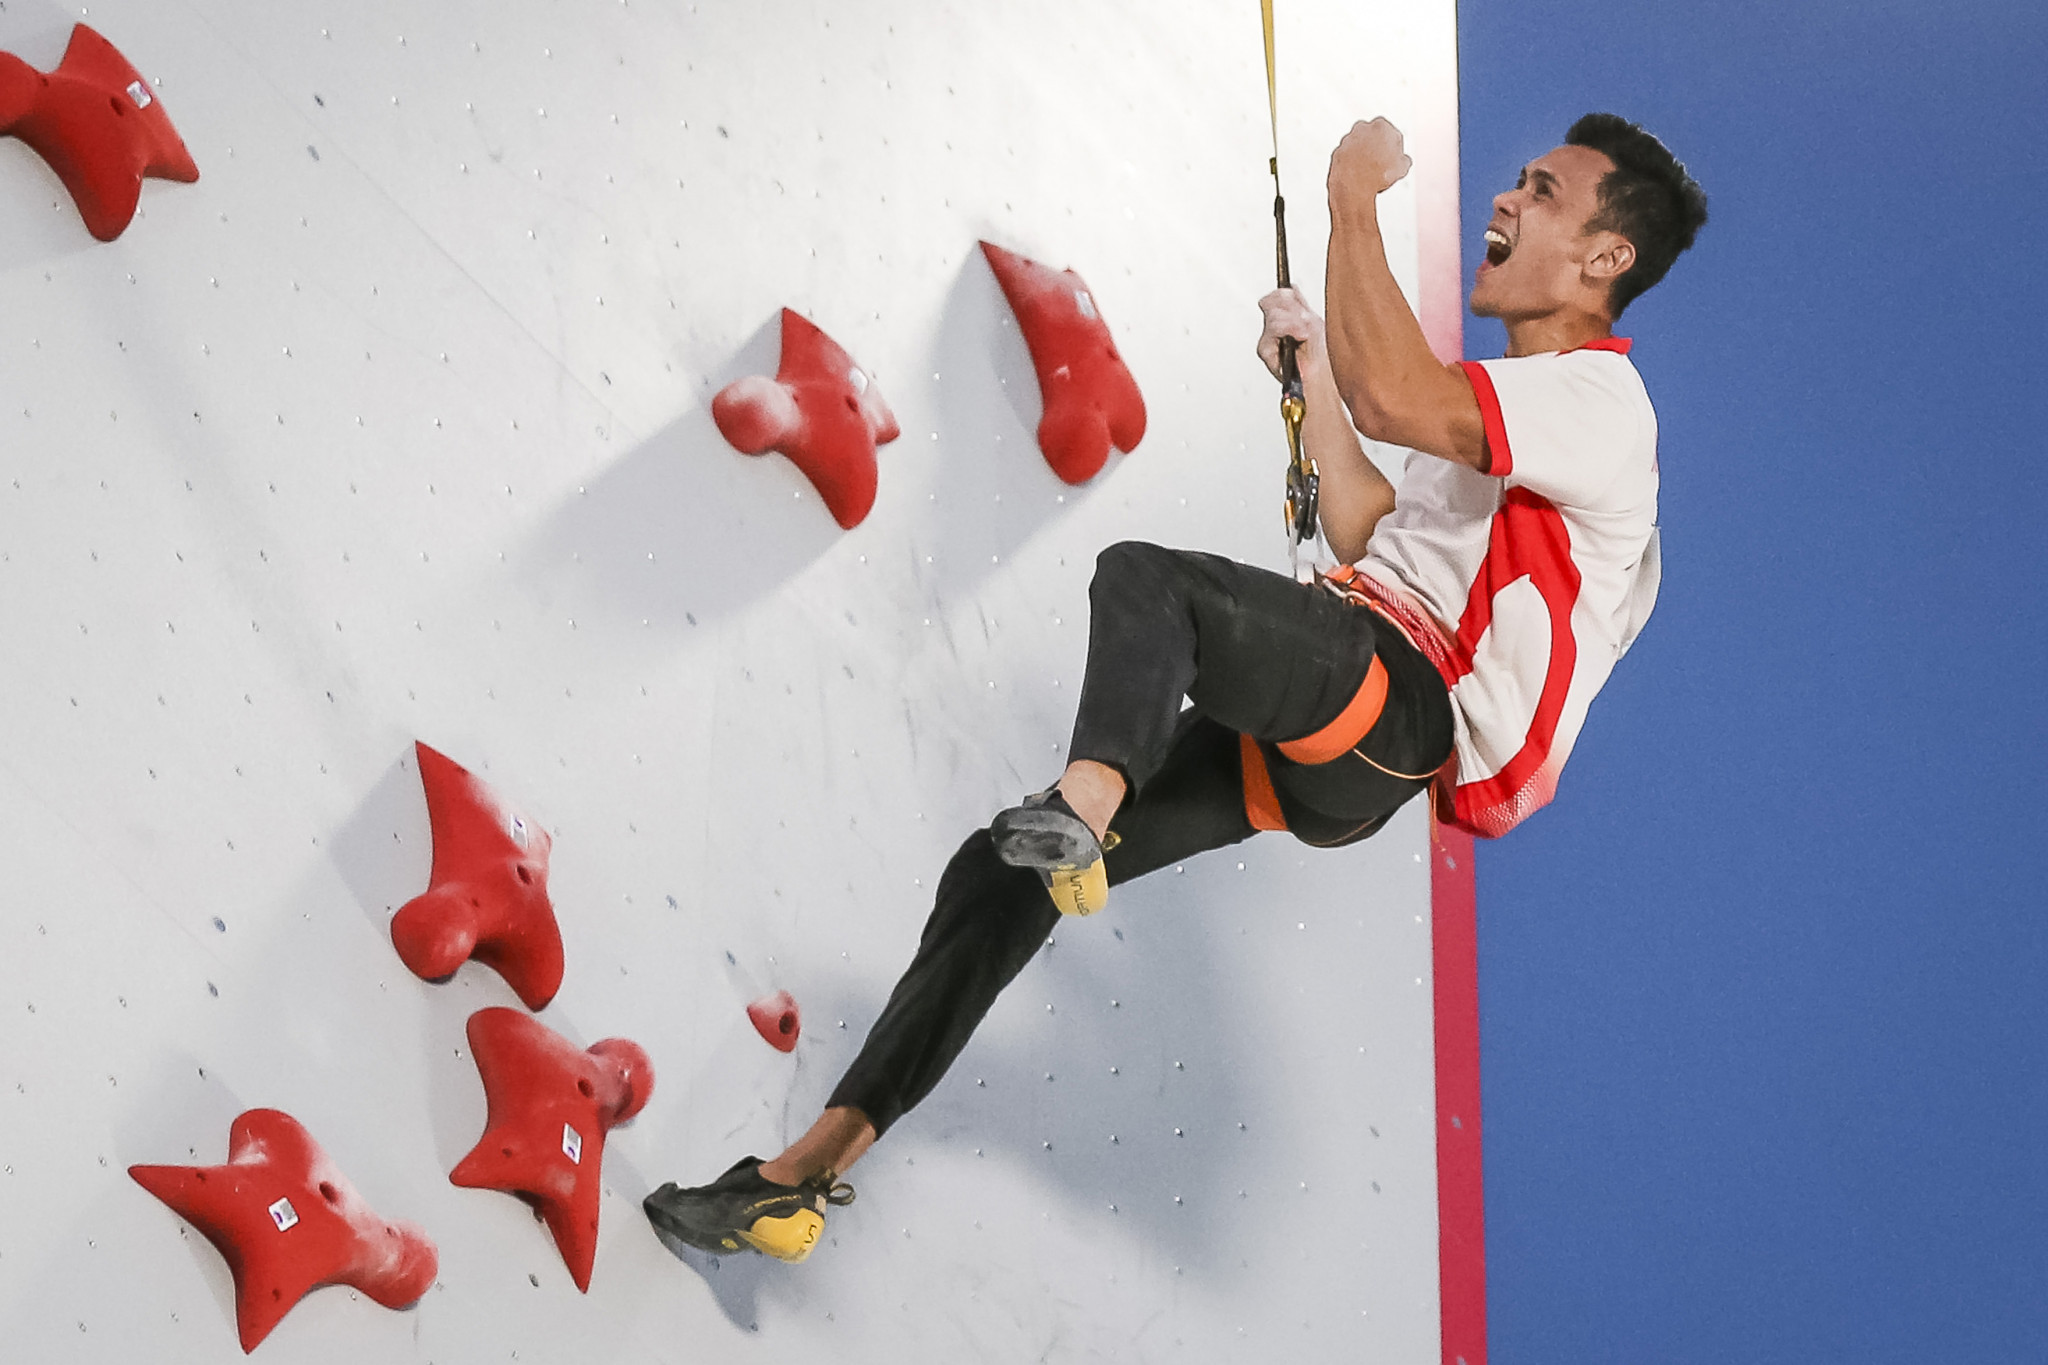 Indonesian sport climber Veddriq Leonardo has been named IWGA Athlete of the Month for May ©Getty Images